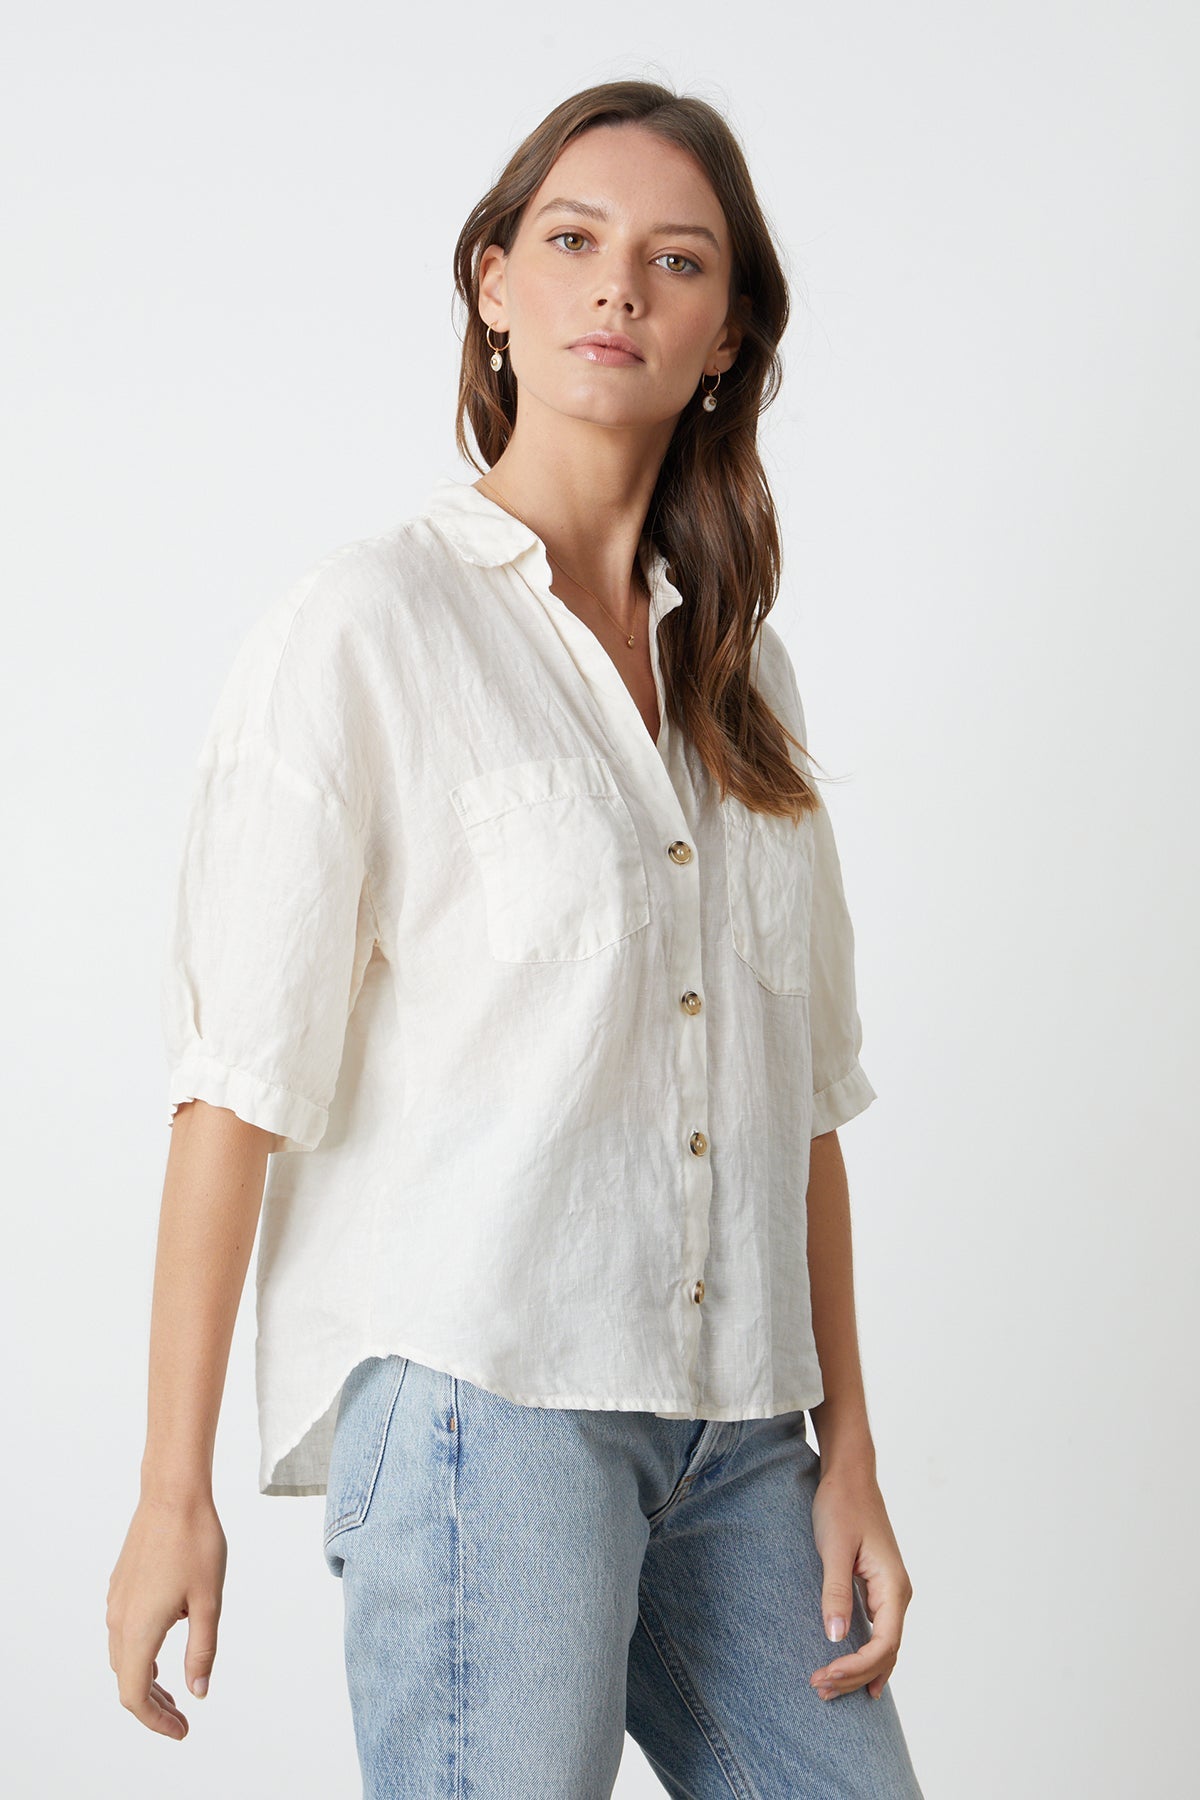 The model is wearing a Velvet by Graham & Spencer MARIA LINEN BUTTON-UP SHIRT and jeans.-26715366949057